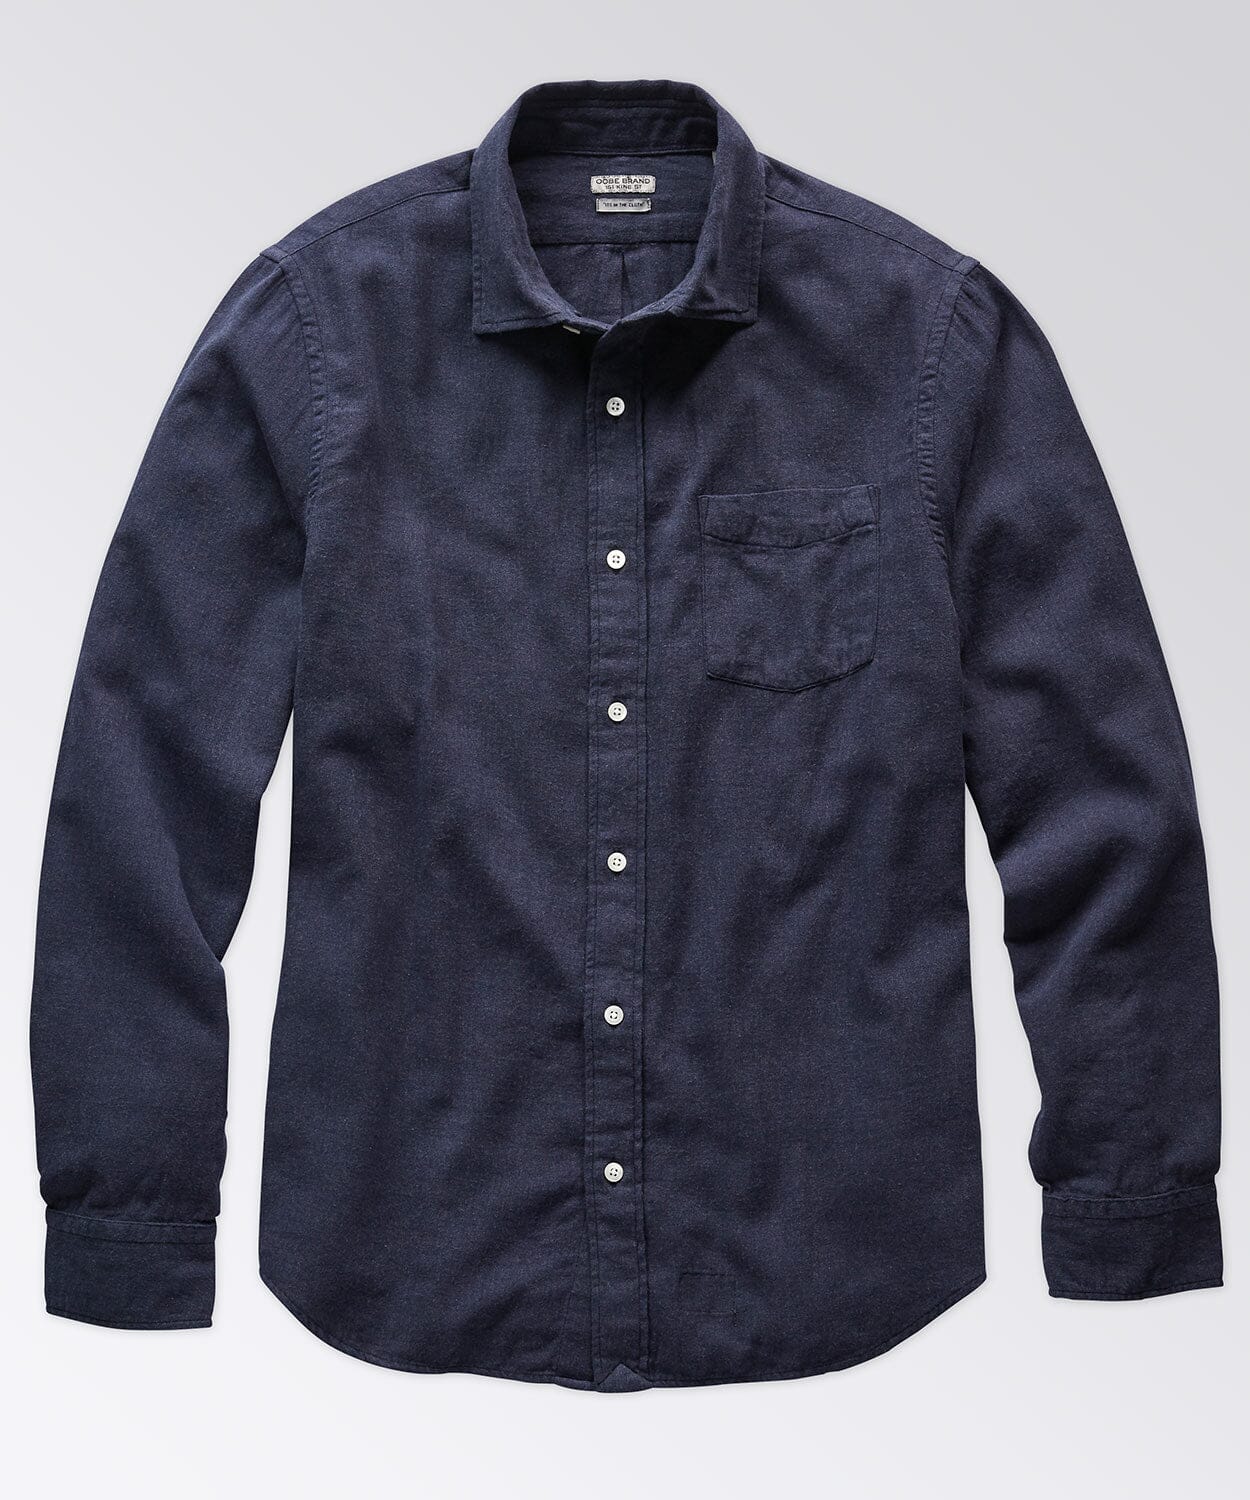 Excella Brushed Heather Solid Shirt